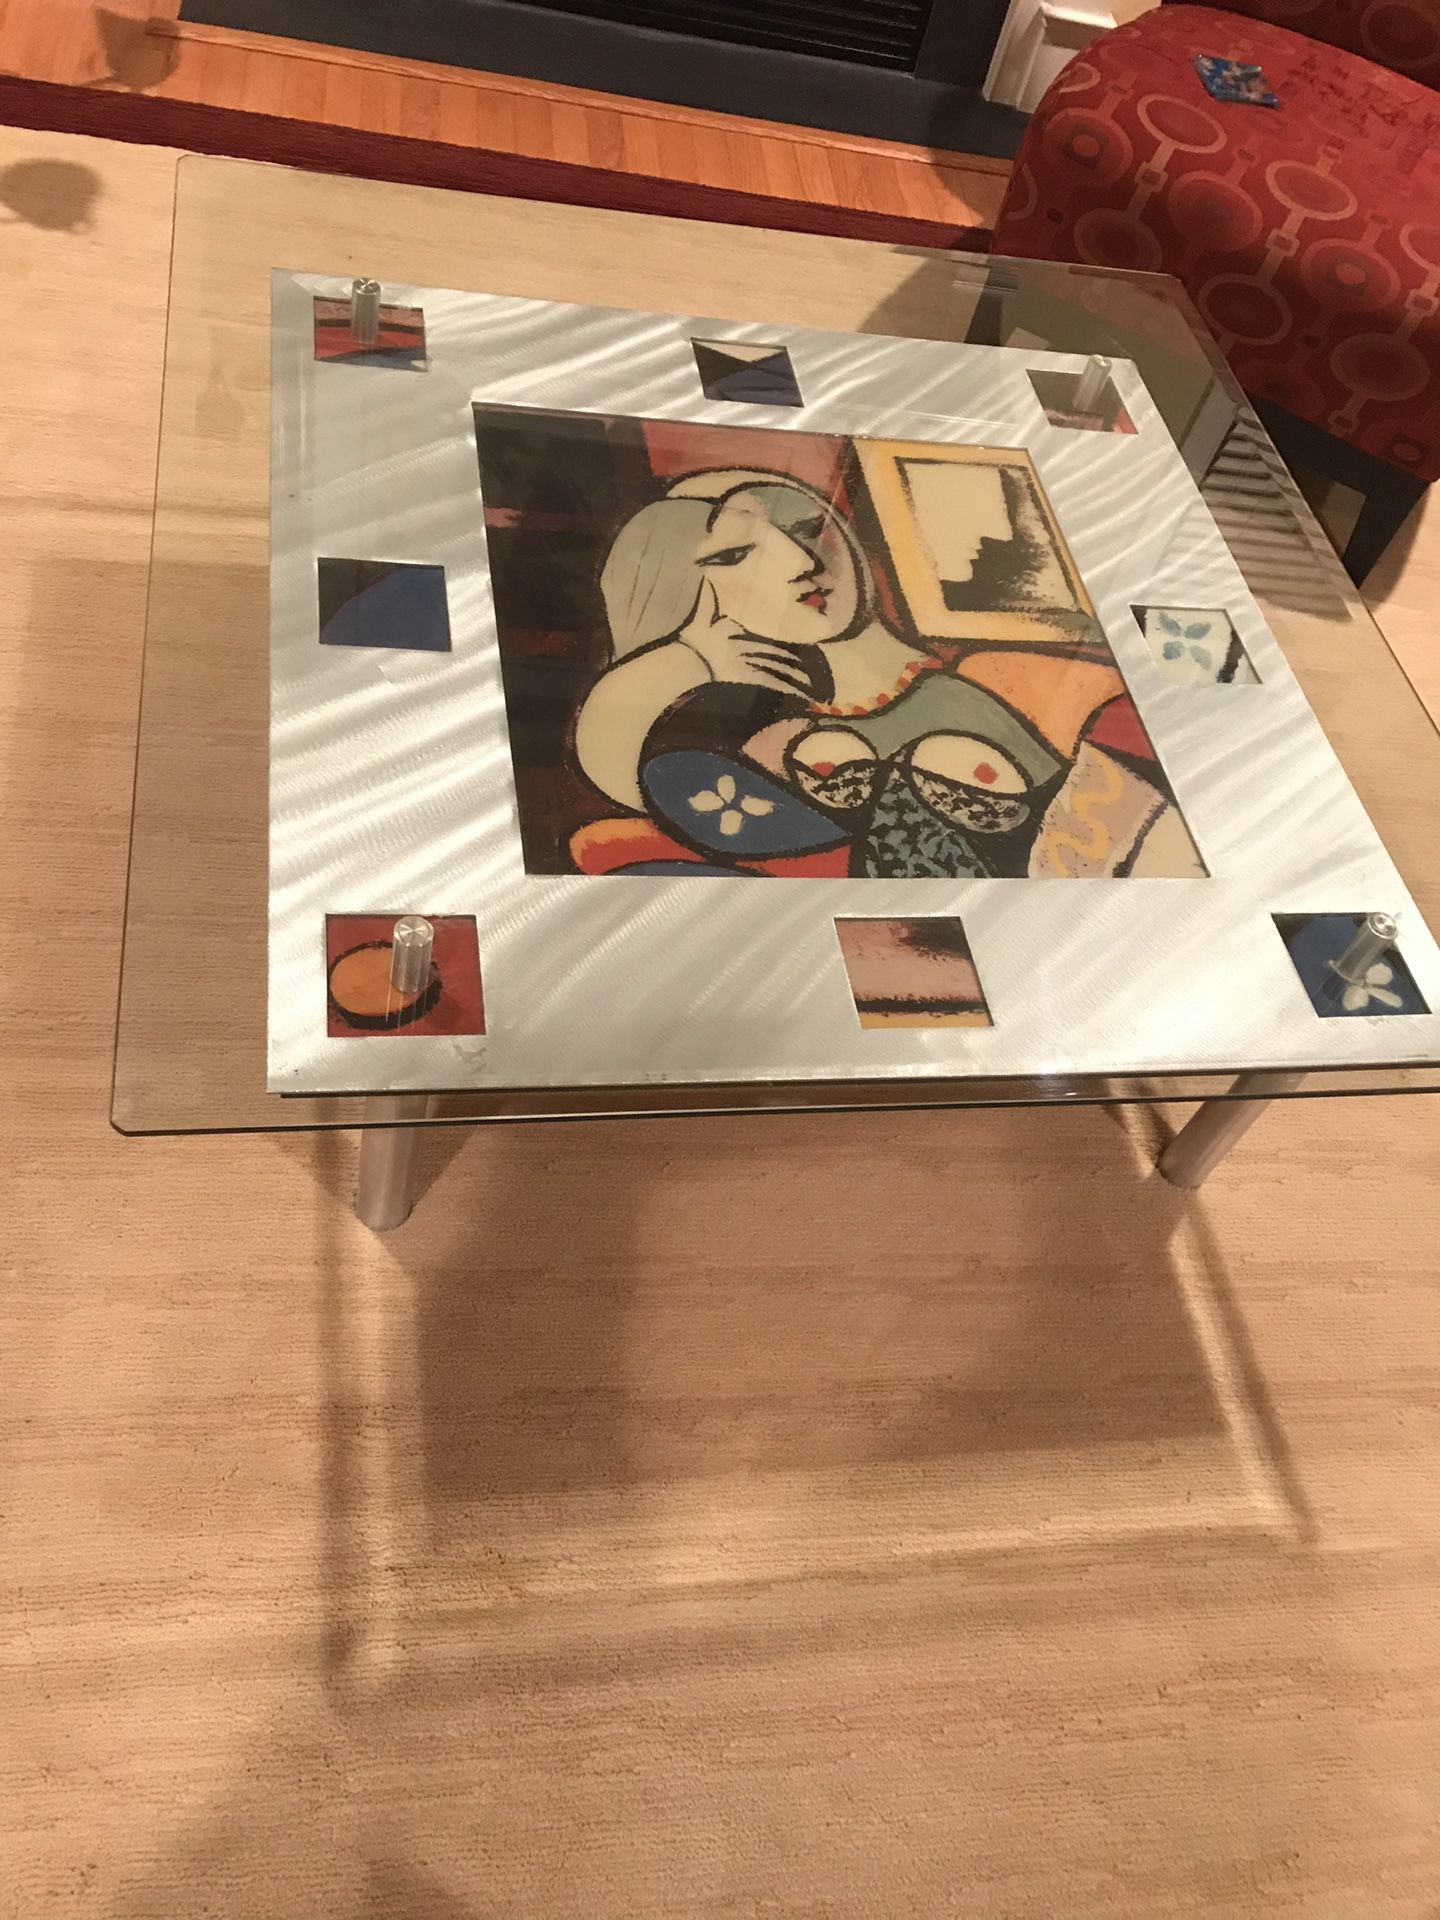 Stunning Picasso Inspired Brushed Chrome Coffee Table and Side Table